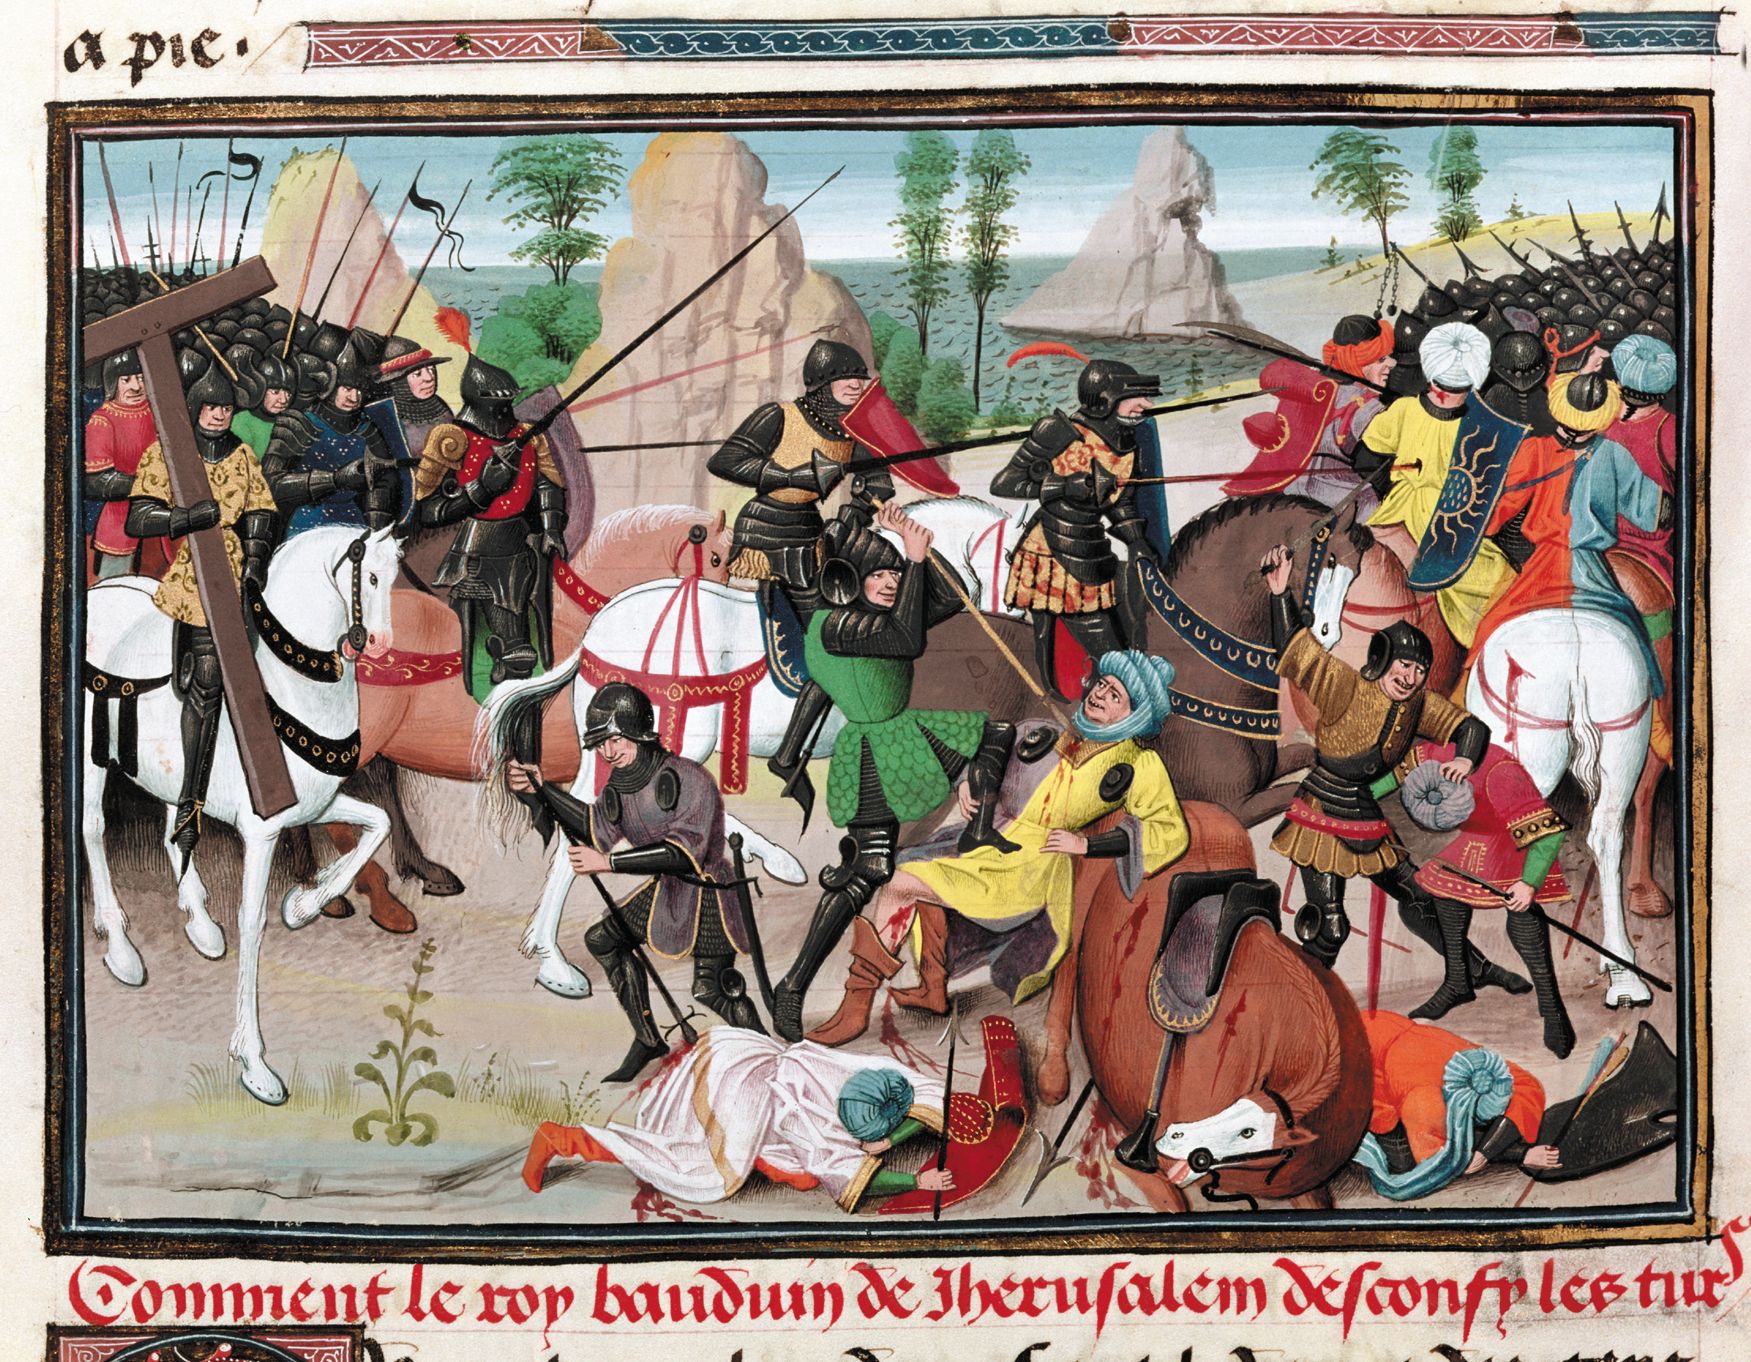 Baldwin, leading the crusaders against the Turks, became the most renowned Christian commander in the First Crusade.